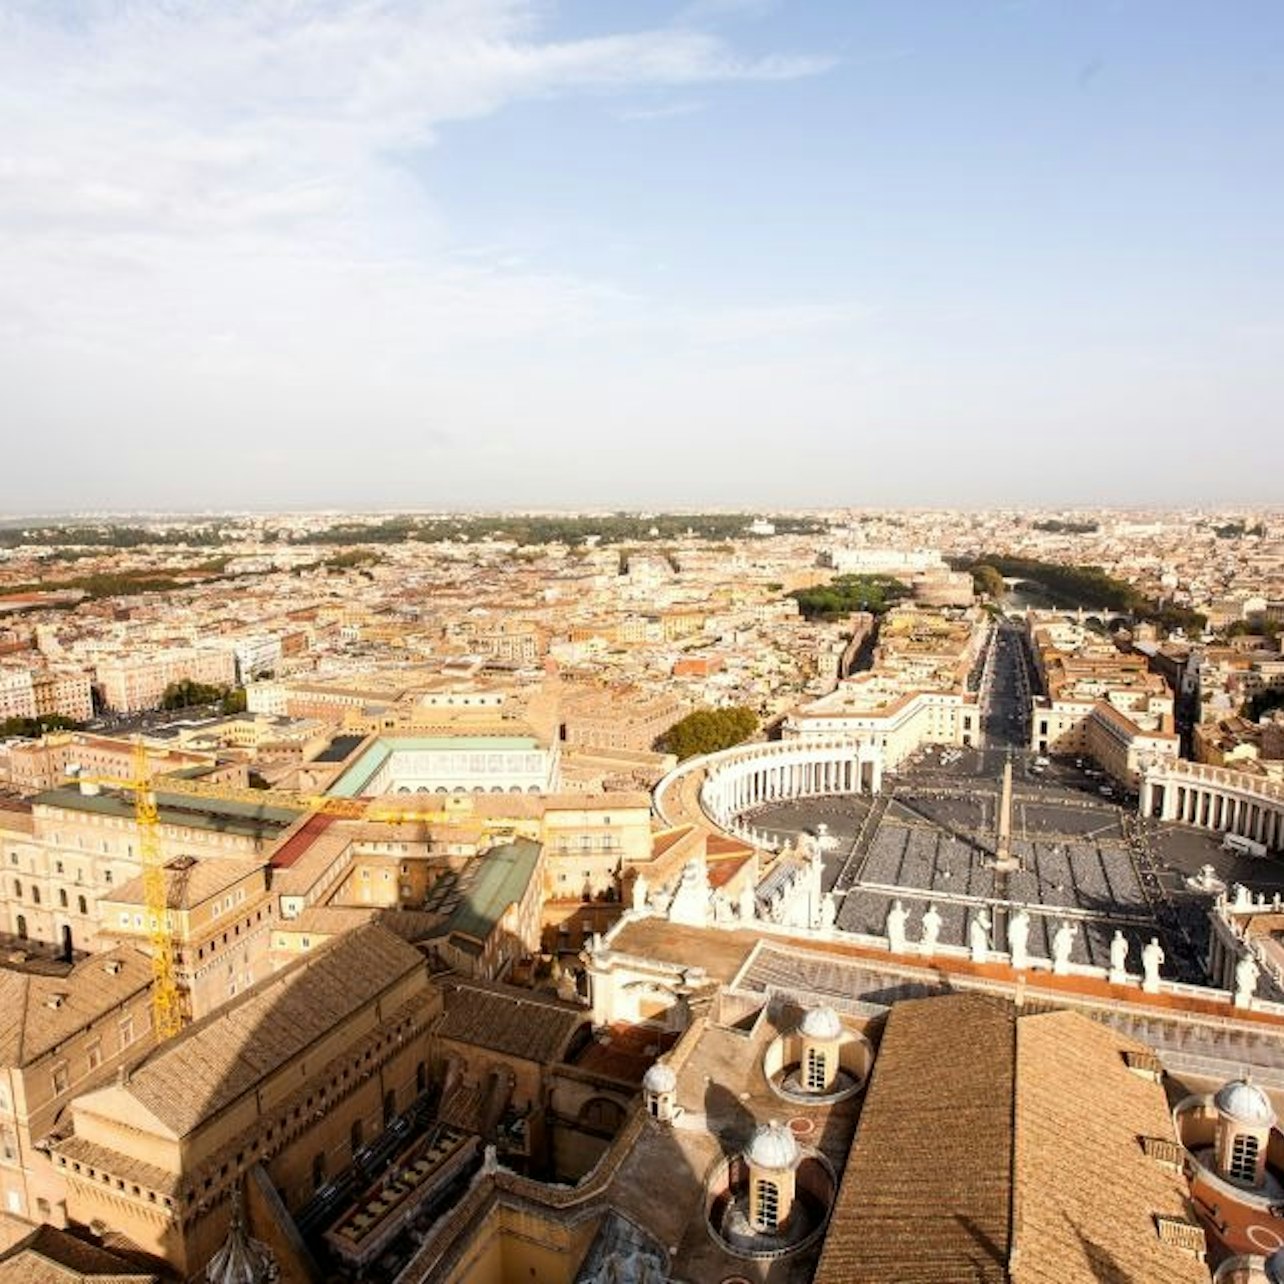 St. Peter's Basilica & Dome Audio Tour - Accommodations in Rome